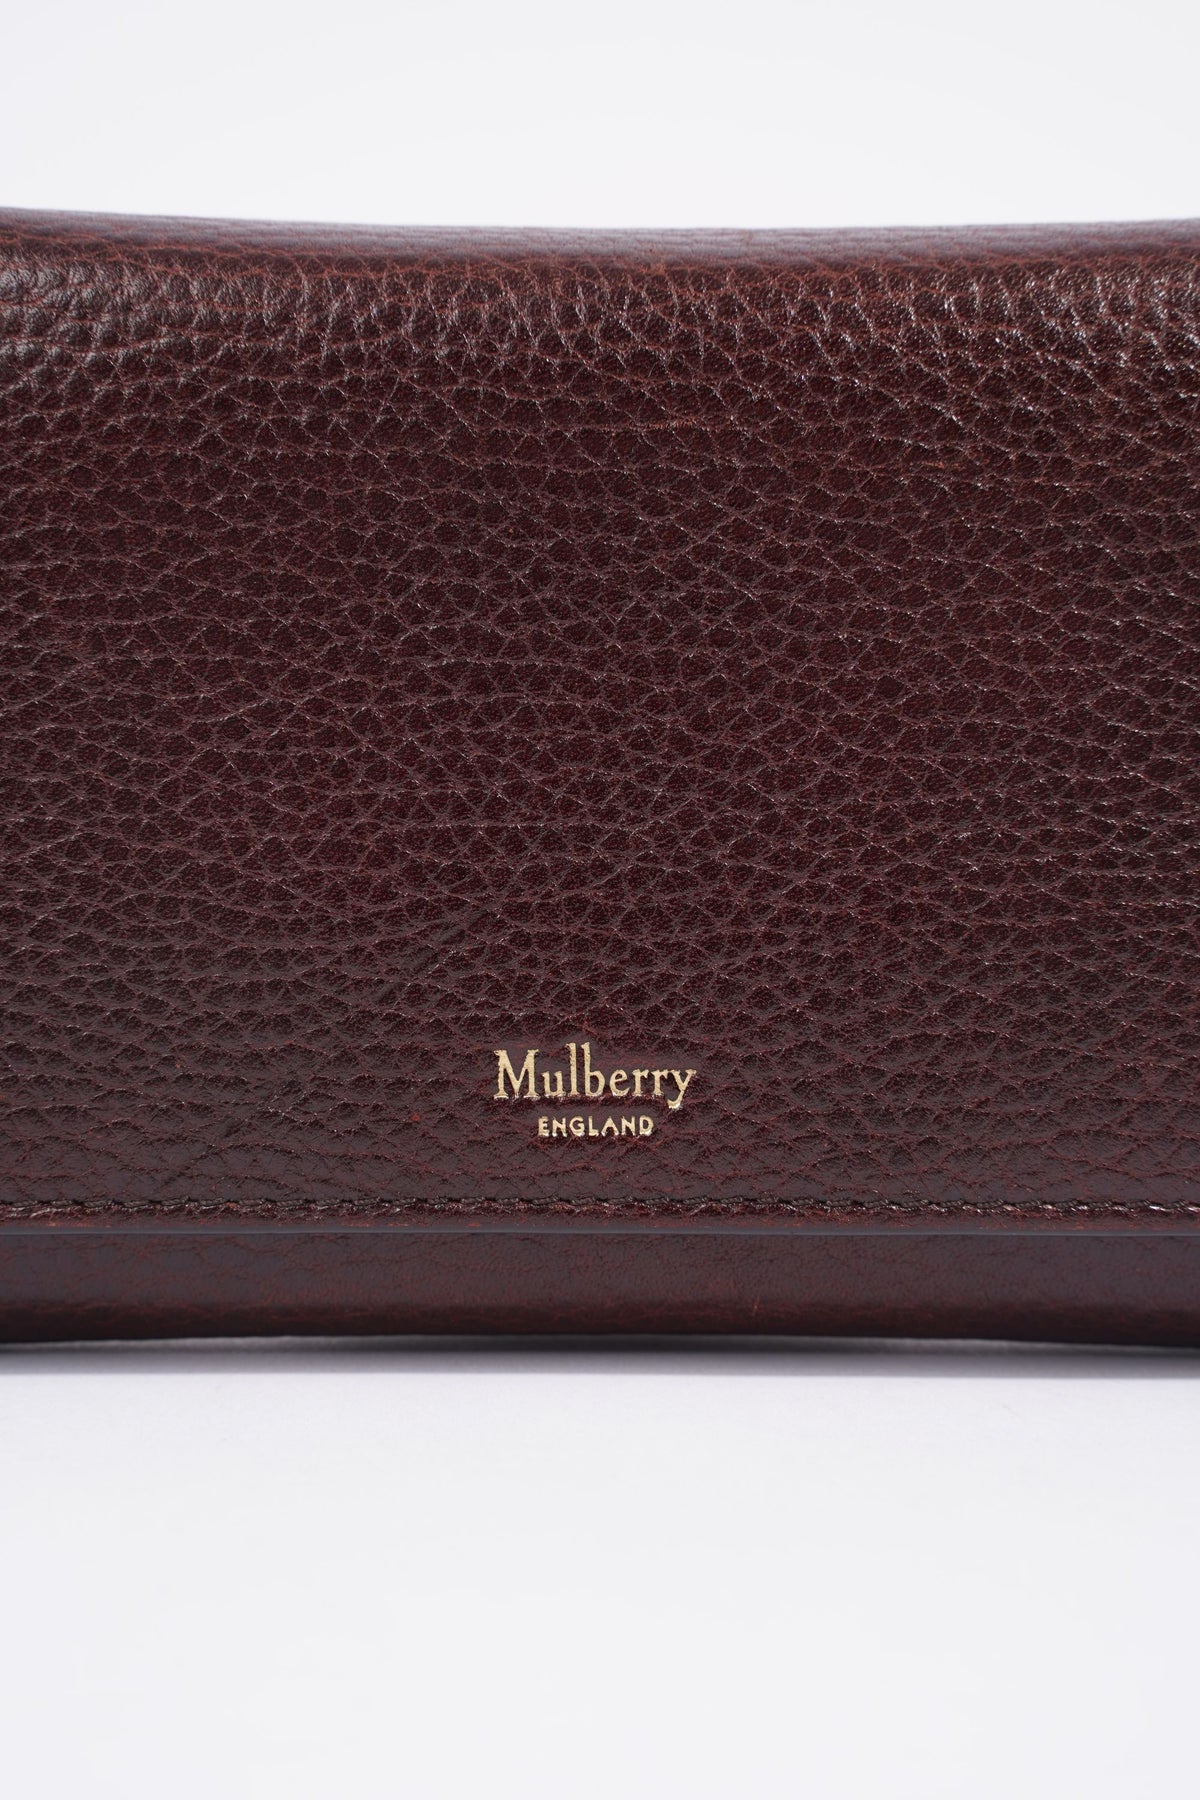 MULBERRY Tree French Long Wallet